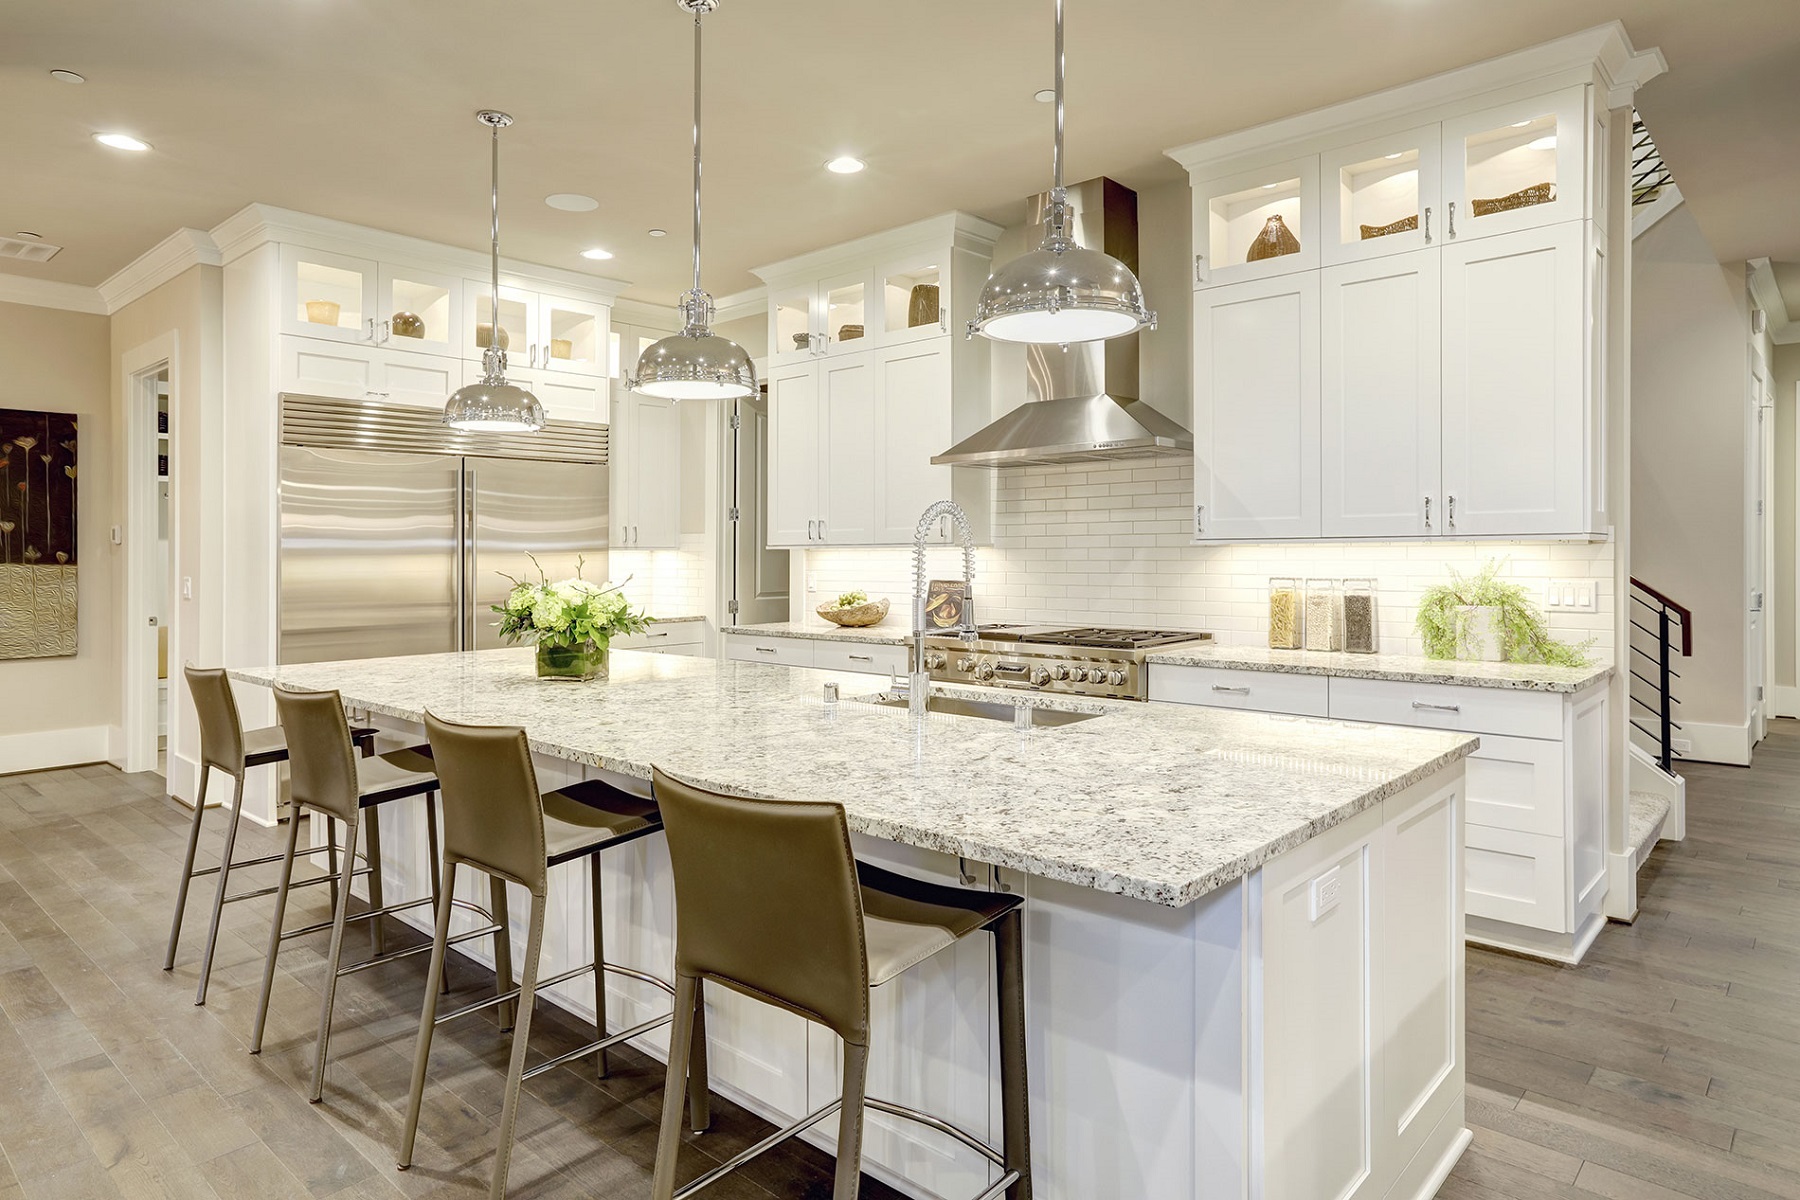 9 Benefits of Getting Granite Countertops for Your Kitchen